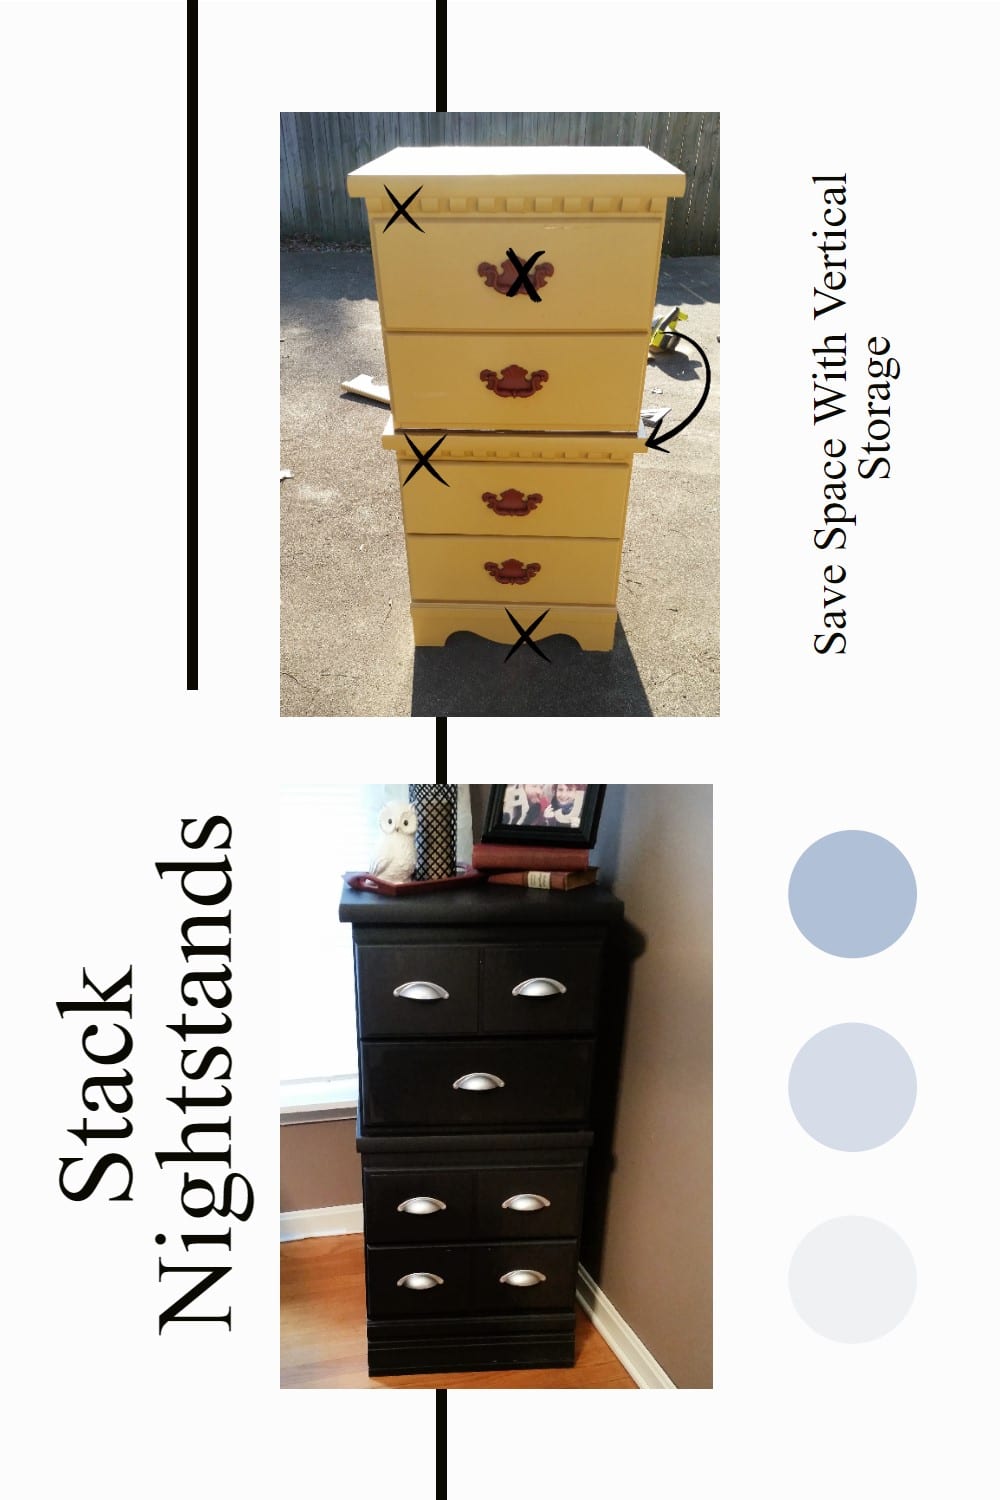 This small chest made from repurposed nightstands gives a good amount of storage with a small footprint. Vertical storage is a great option in small spaces. #MyRepurposedLife #repurposed #nightstands #stacked #furniture #vertical #storage via @repurposedlife